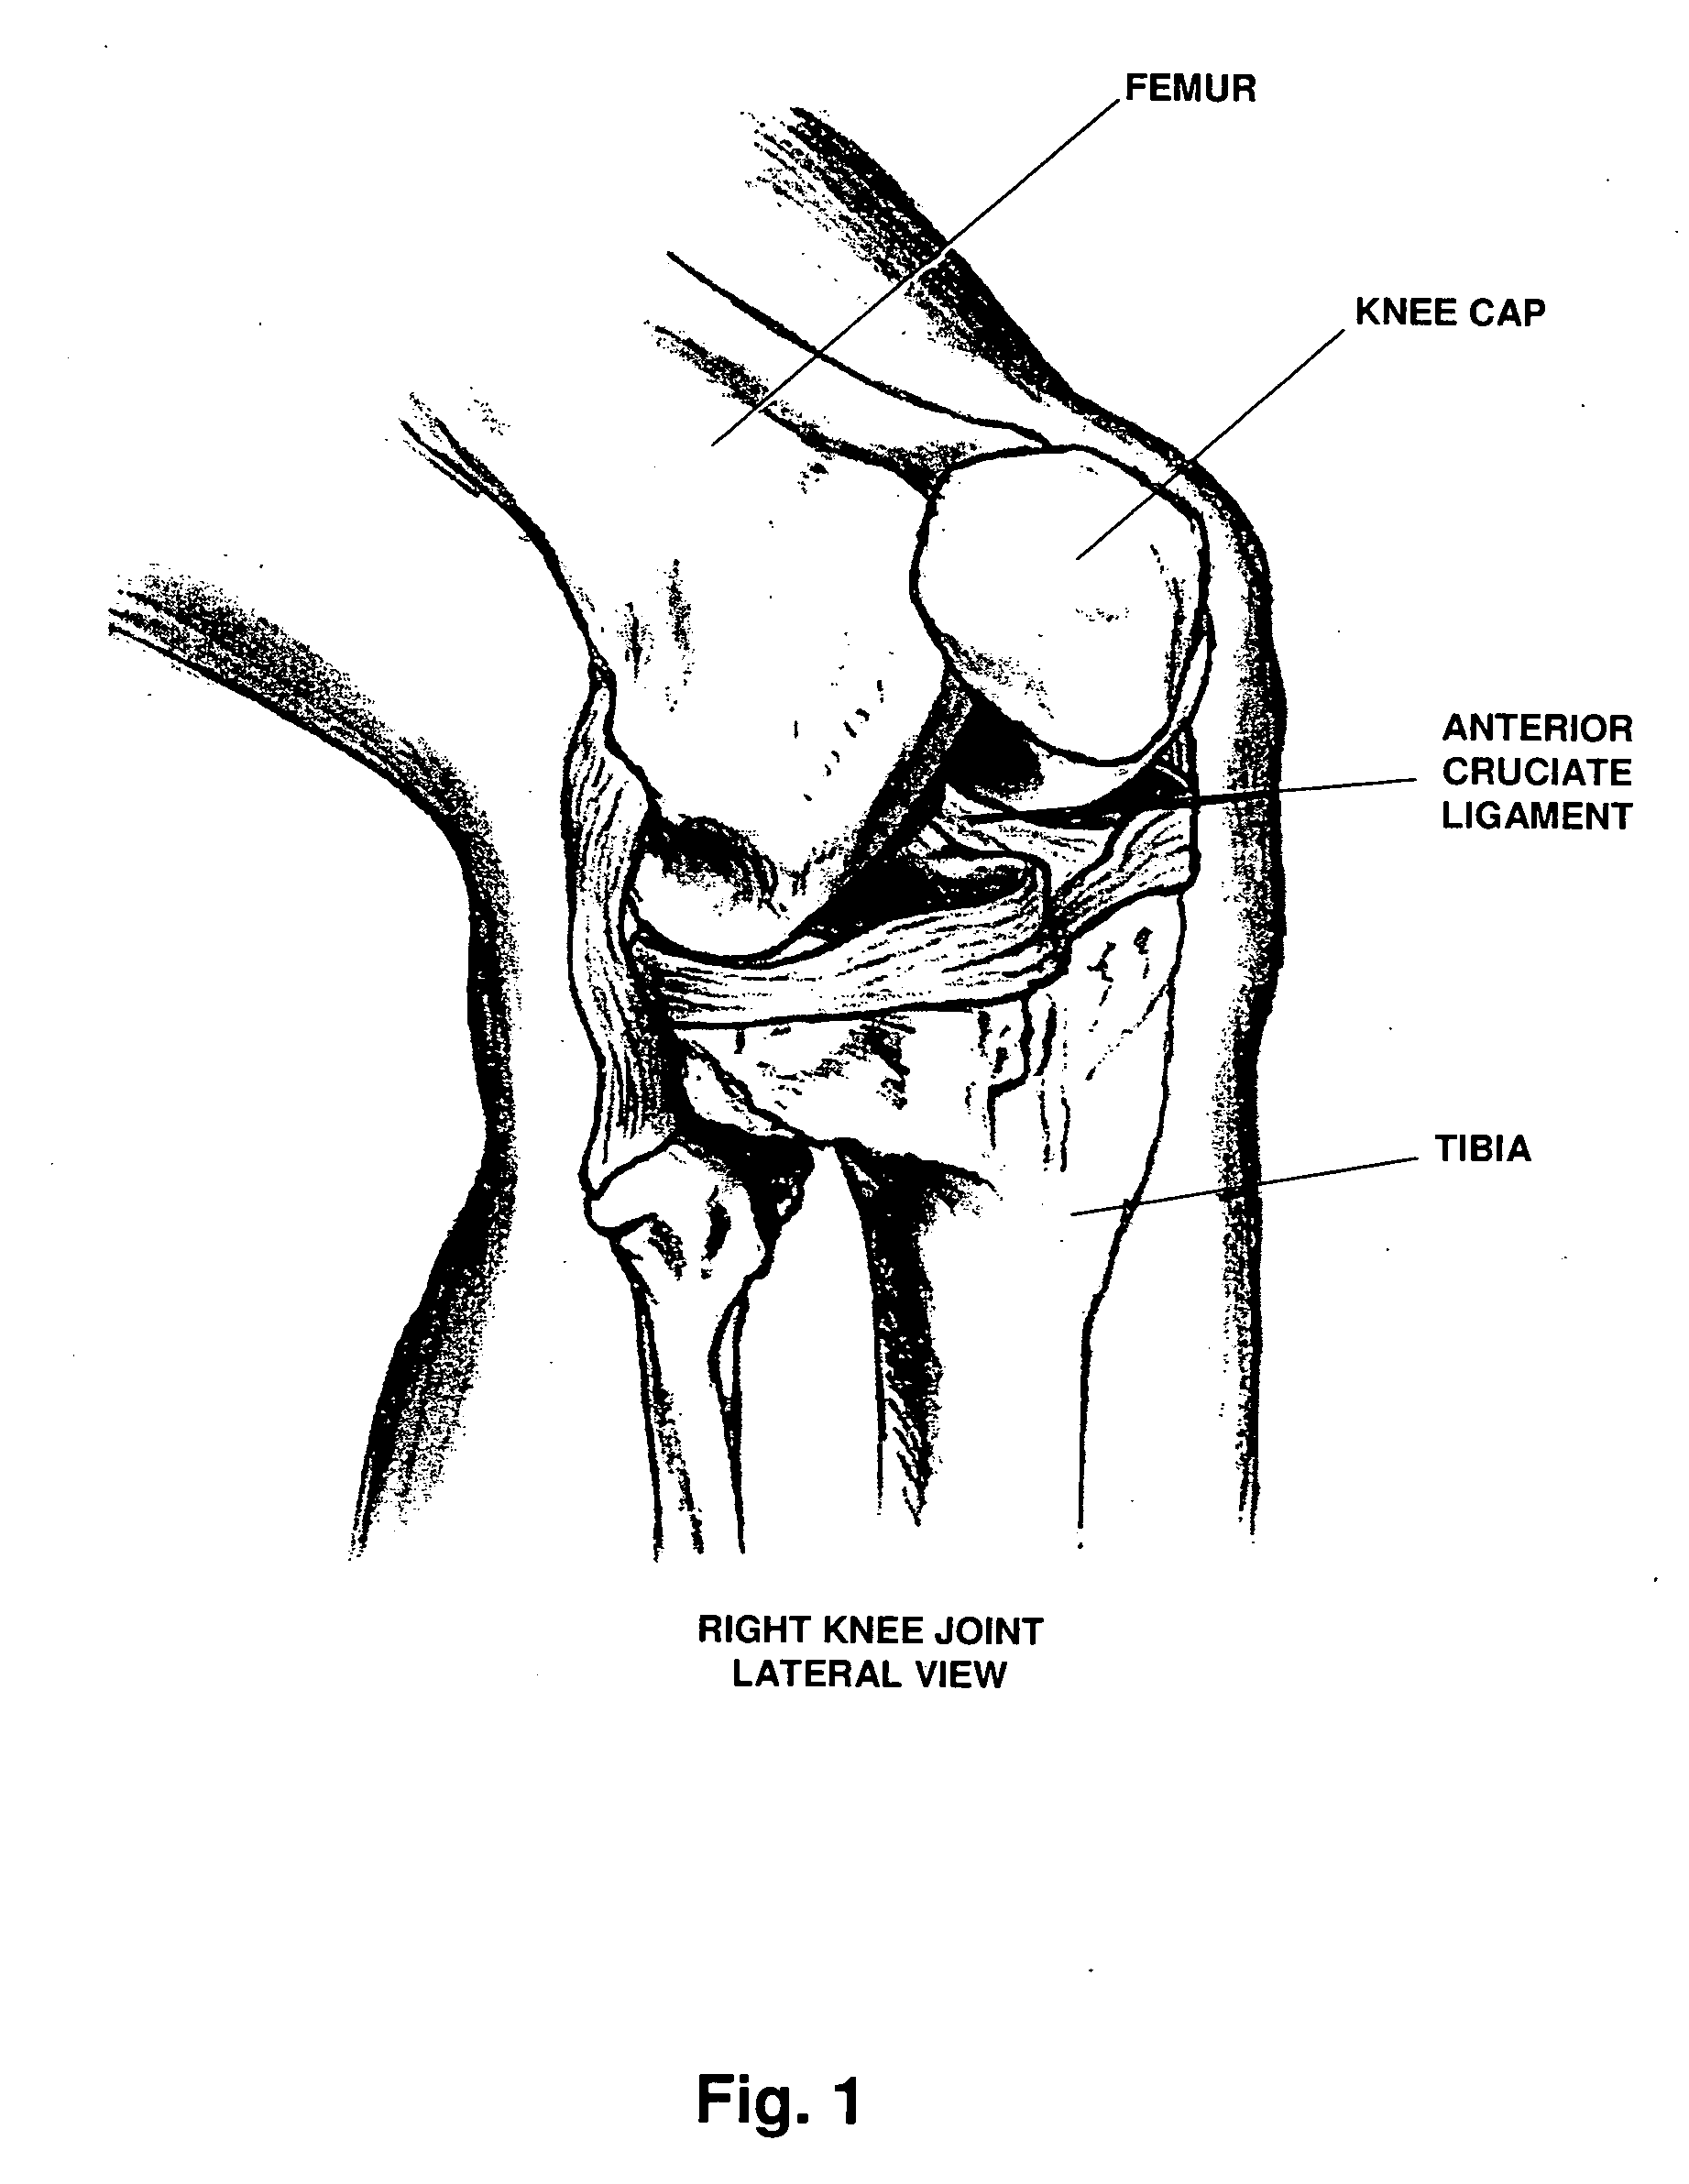 Method for repair and reconstruction of ruptured ligaments or tendons and for treatment of ligament and tendon injuries